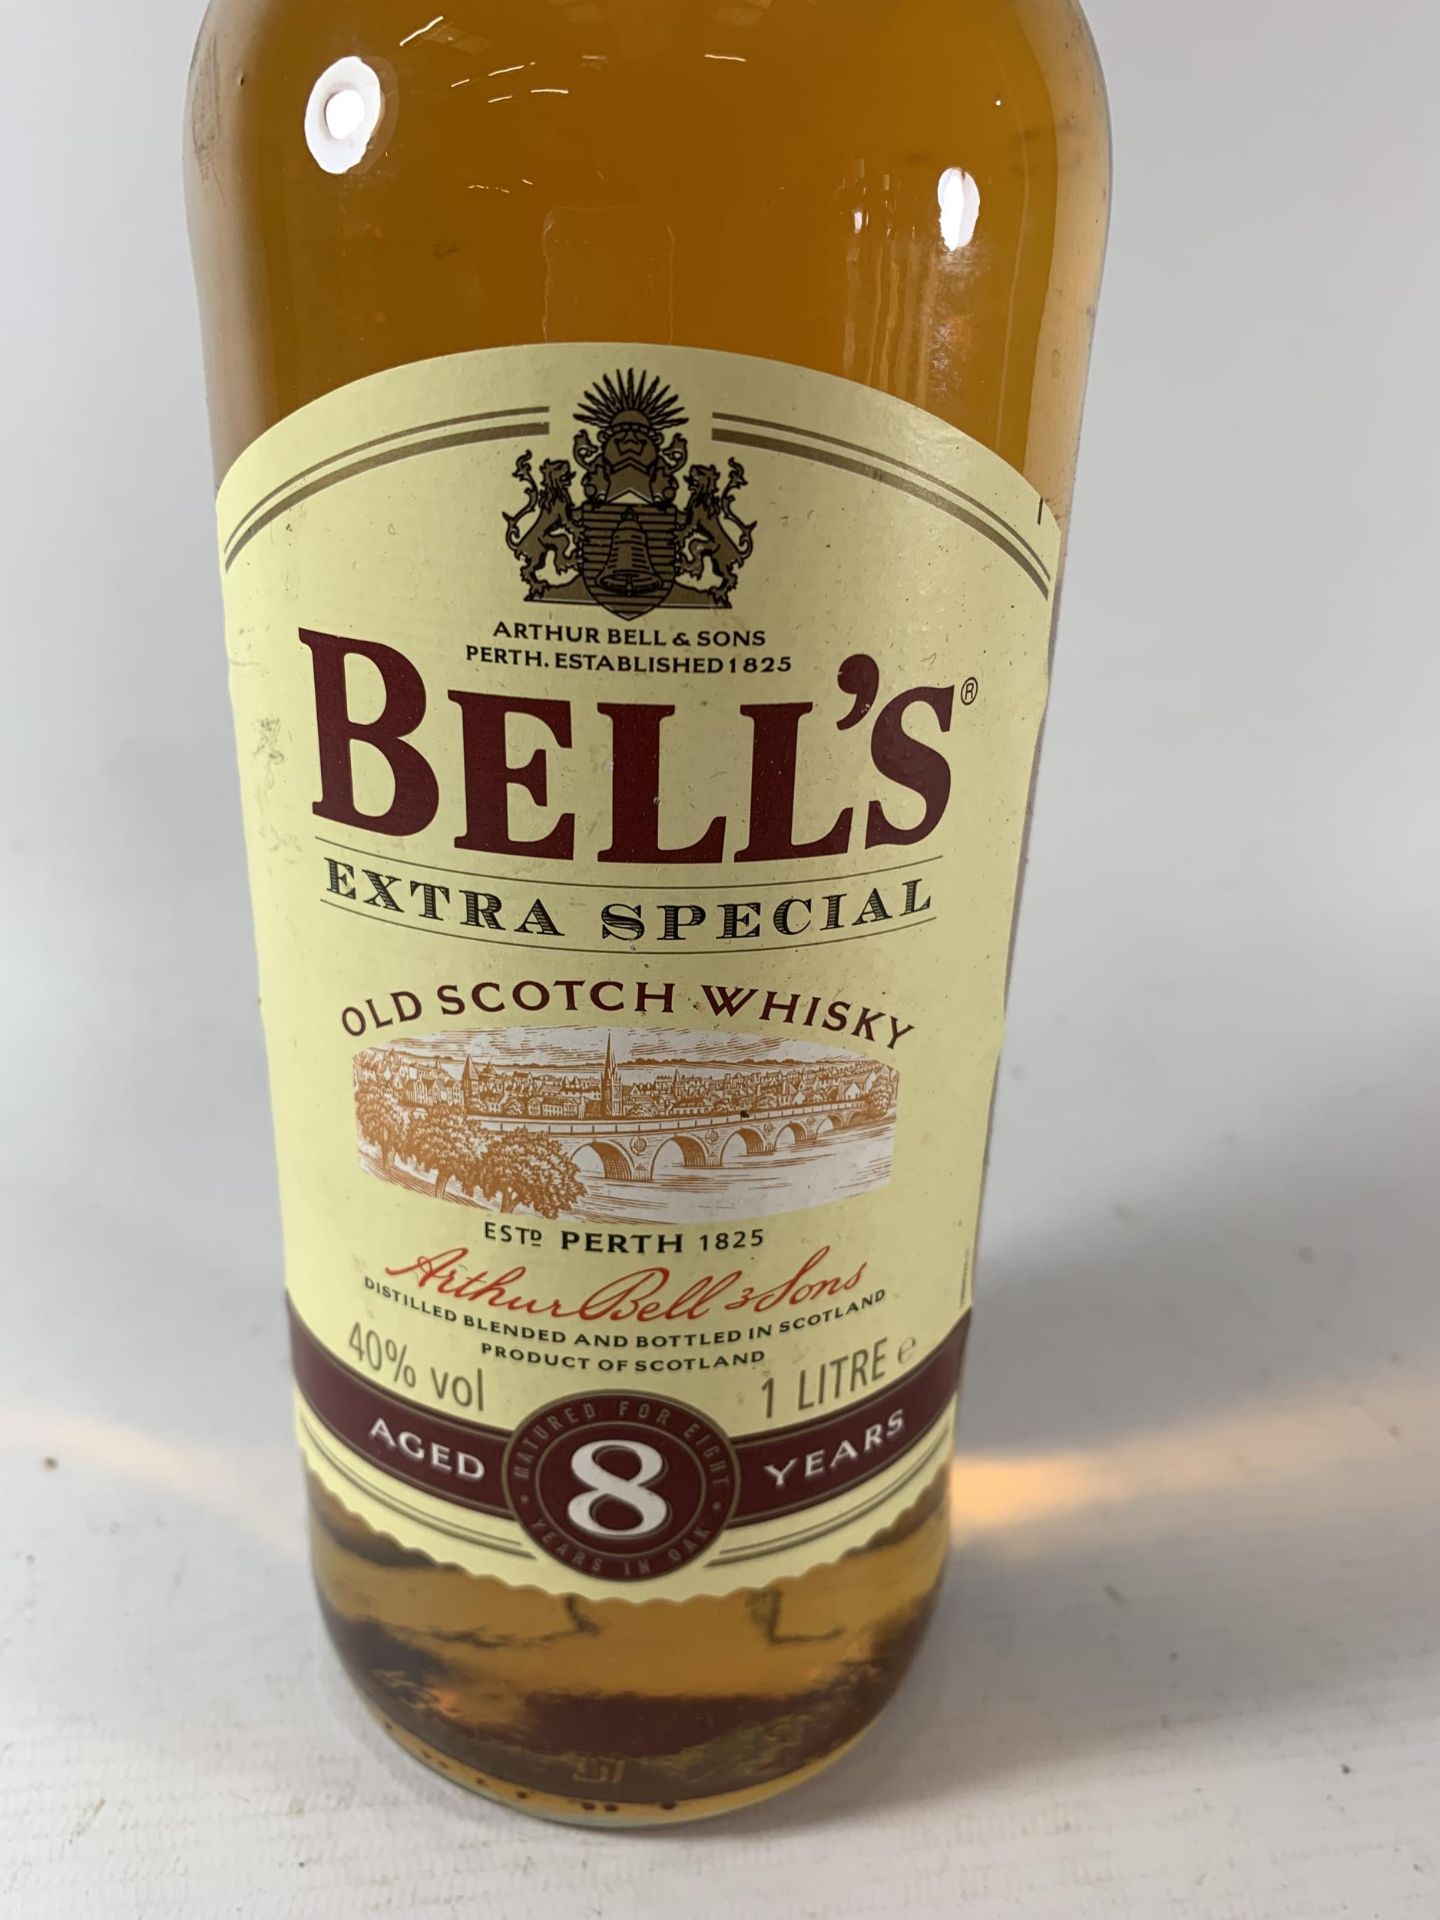 1 X 1L BOTTLE - BELL'S EXTRA SPECIAL AGED 8 YEARS OLD SCOTCH WHISKY - Image 2 of 3